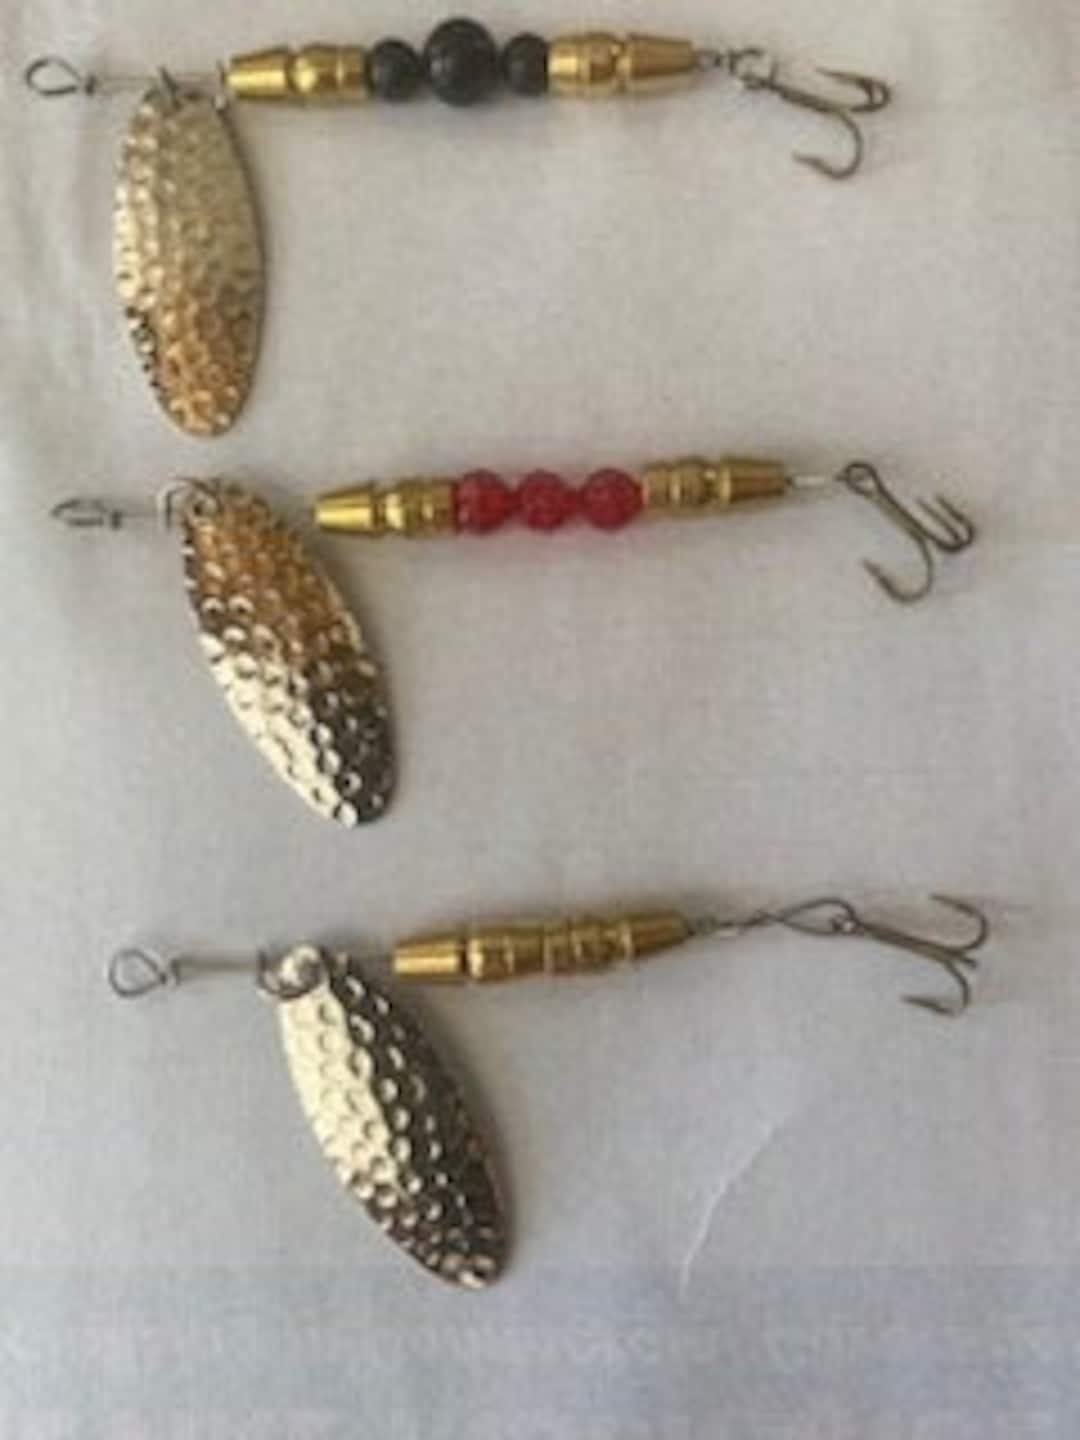 Homemade Quality Fishing Spinners -  Canada